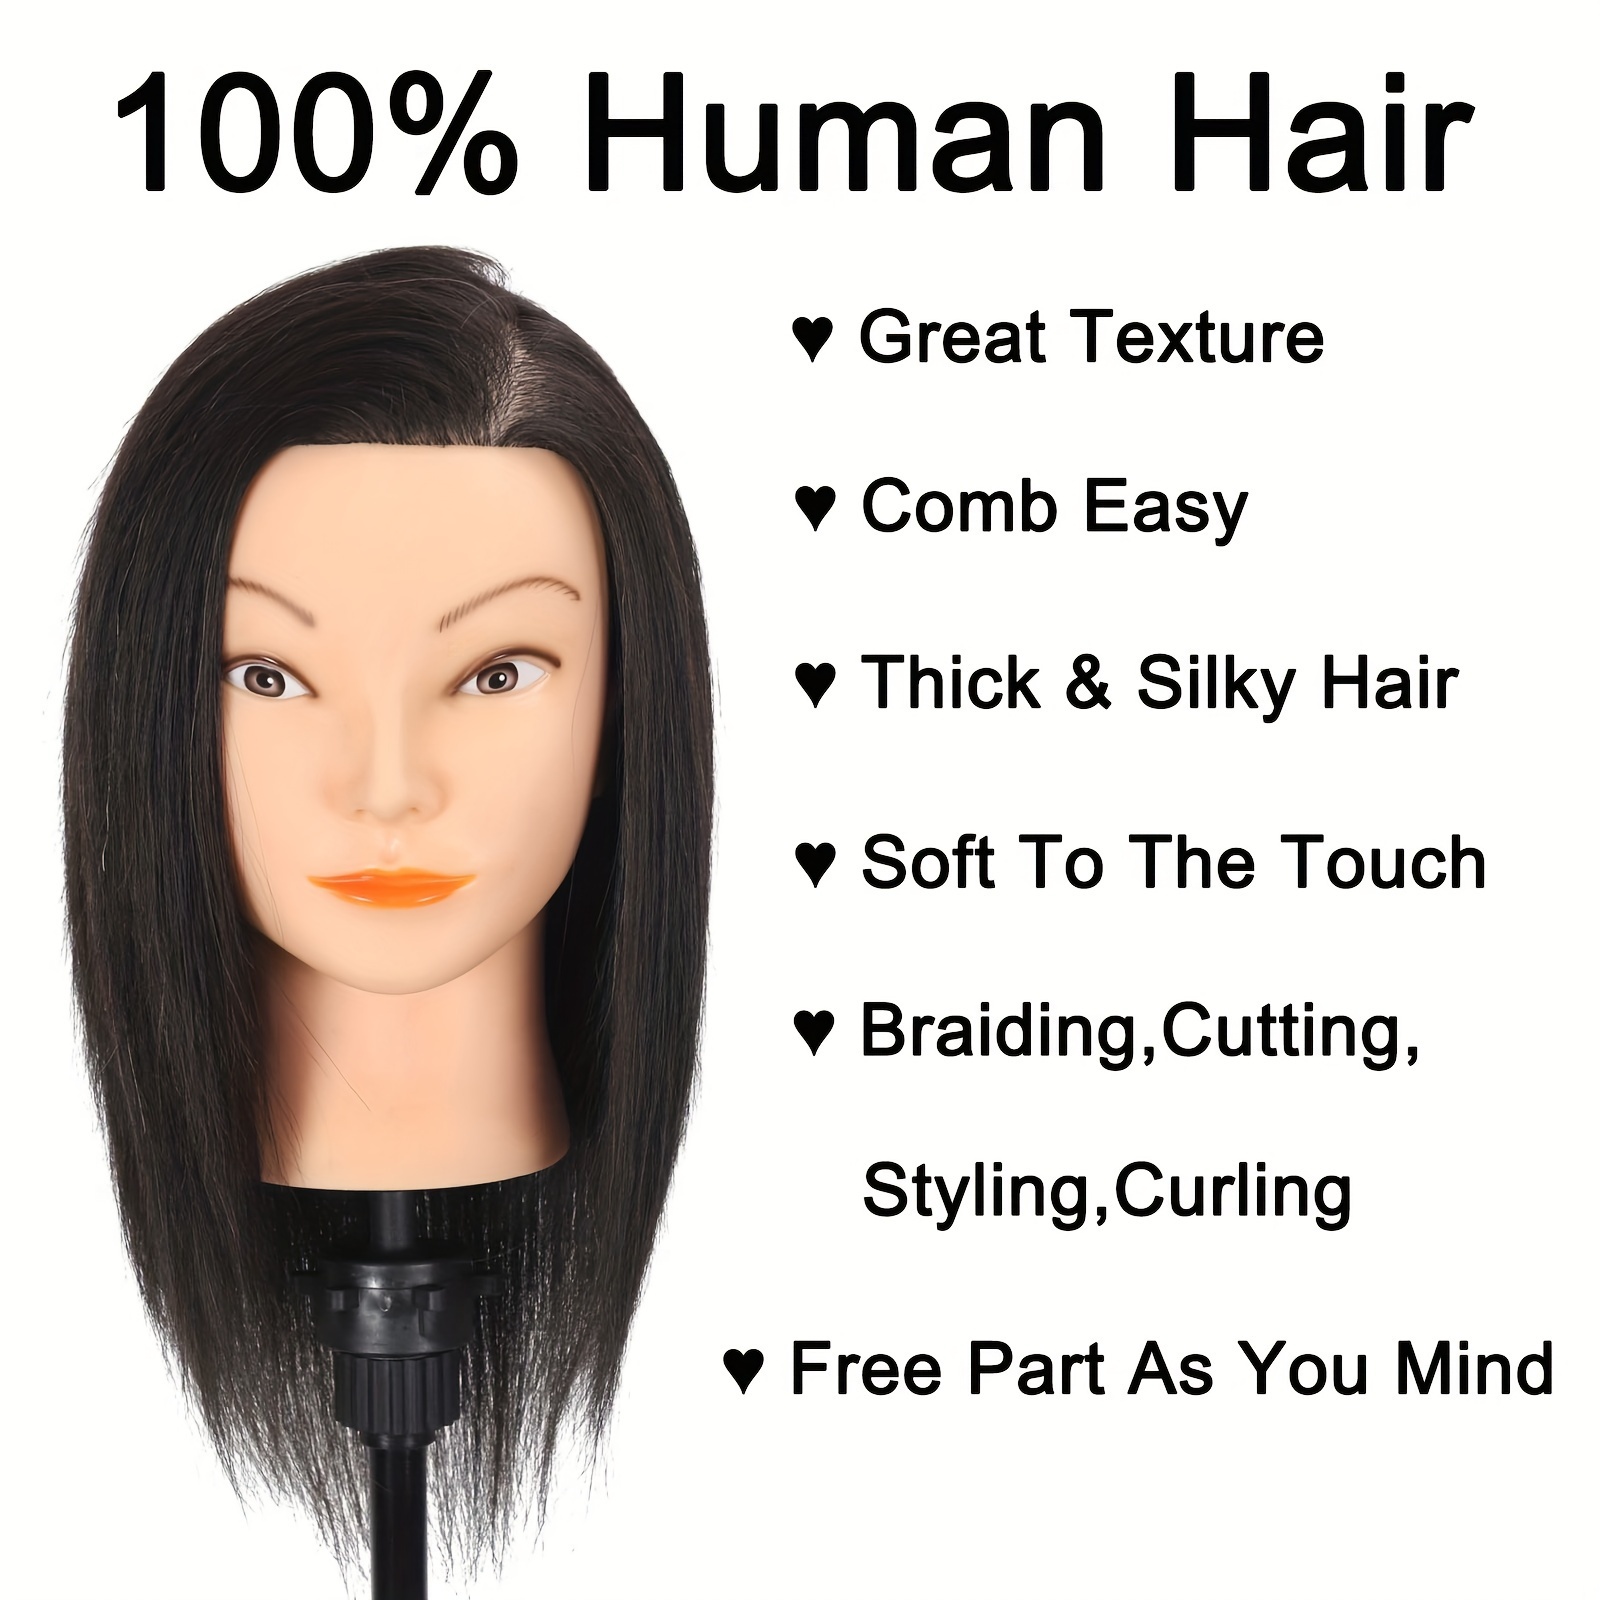 Cosmetology Mannequin Head with Human Hair, Premium 100% Real Human Hair  Mannequin Manican Heads, Maniquins Manikin Head with Human Hair Styling